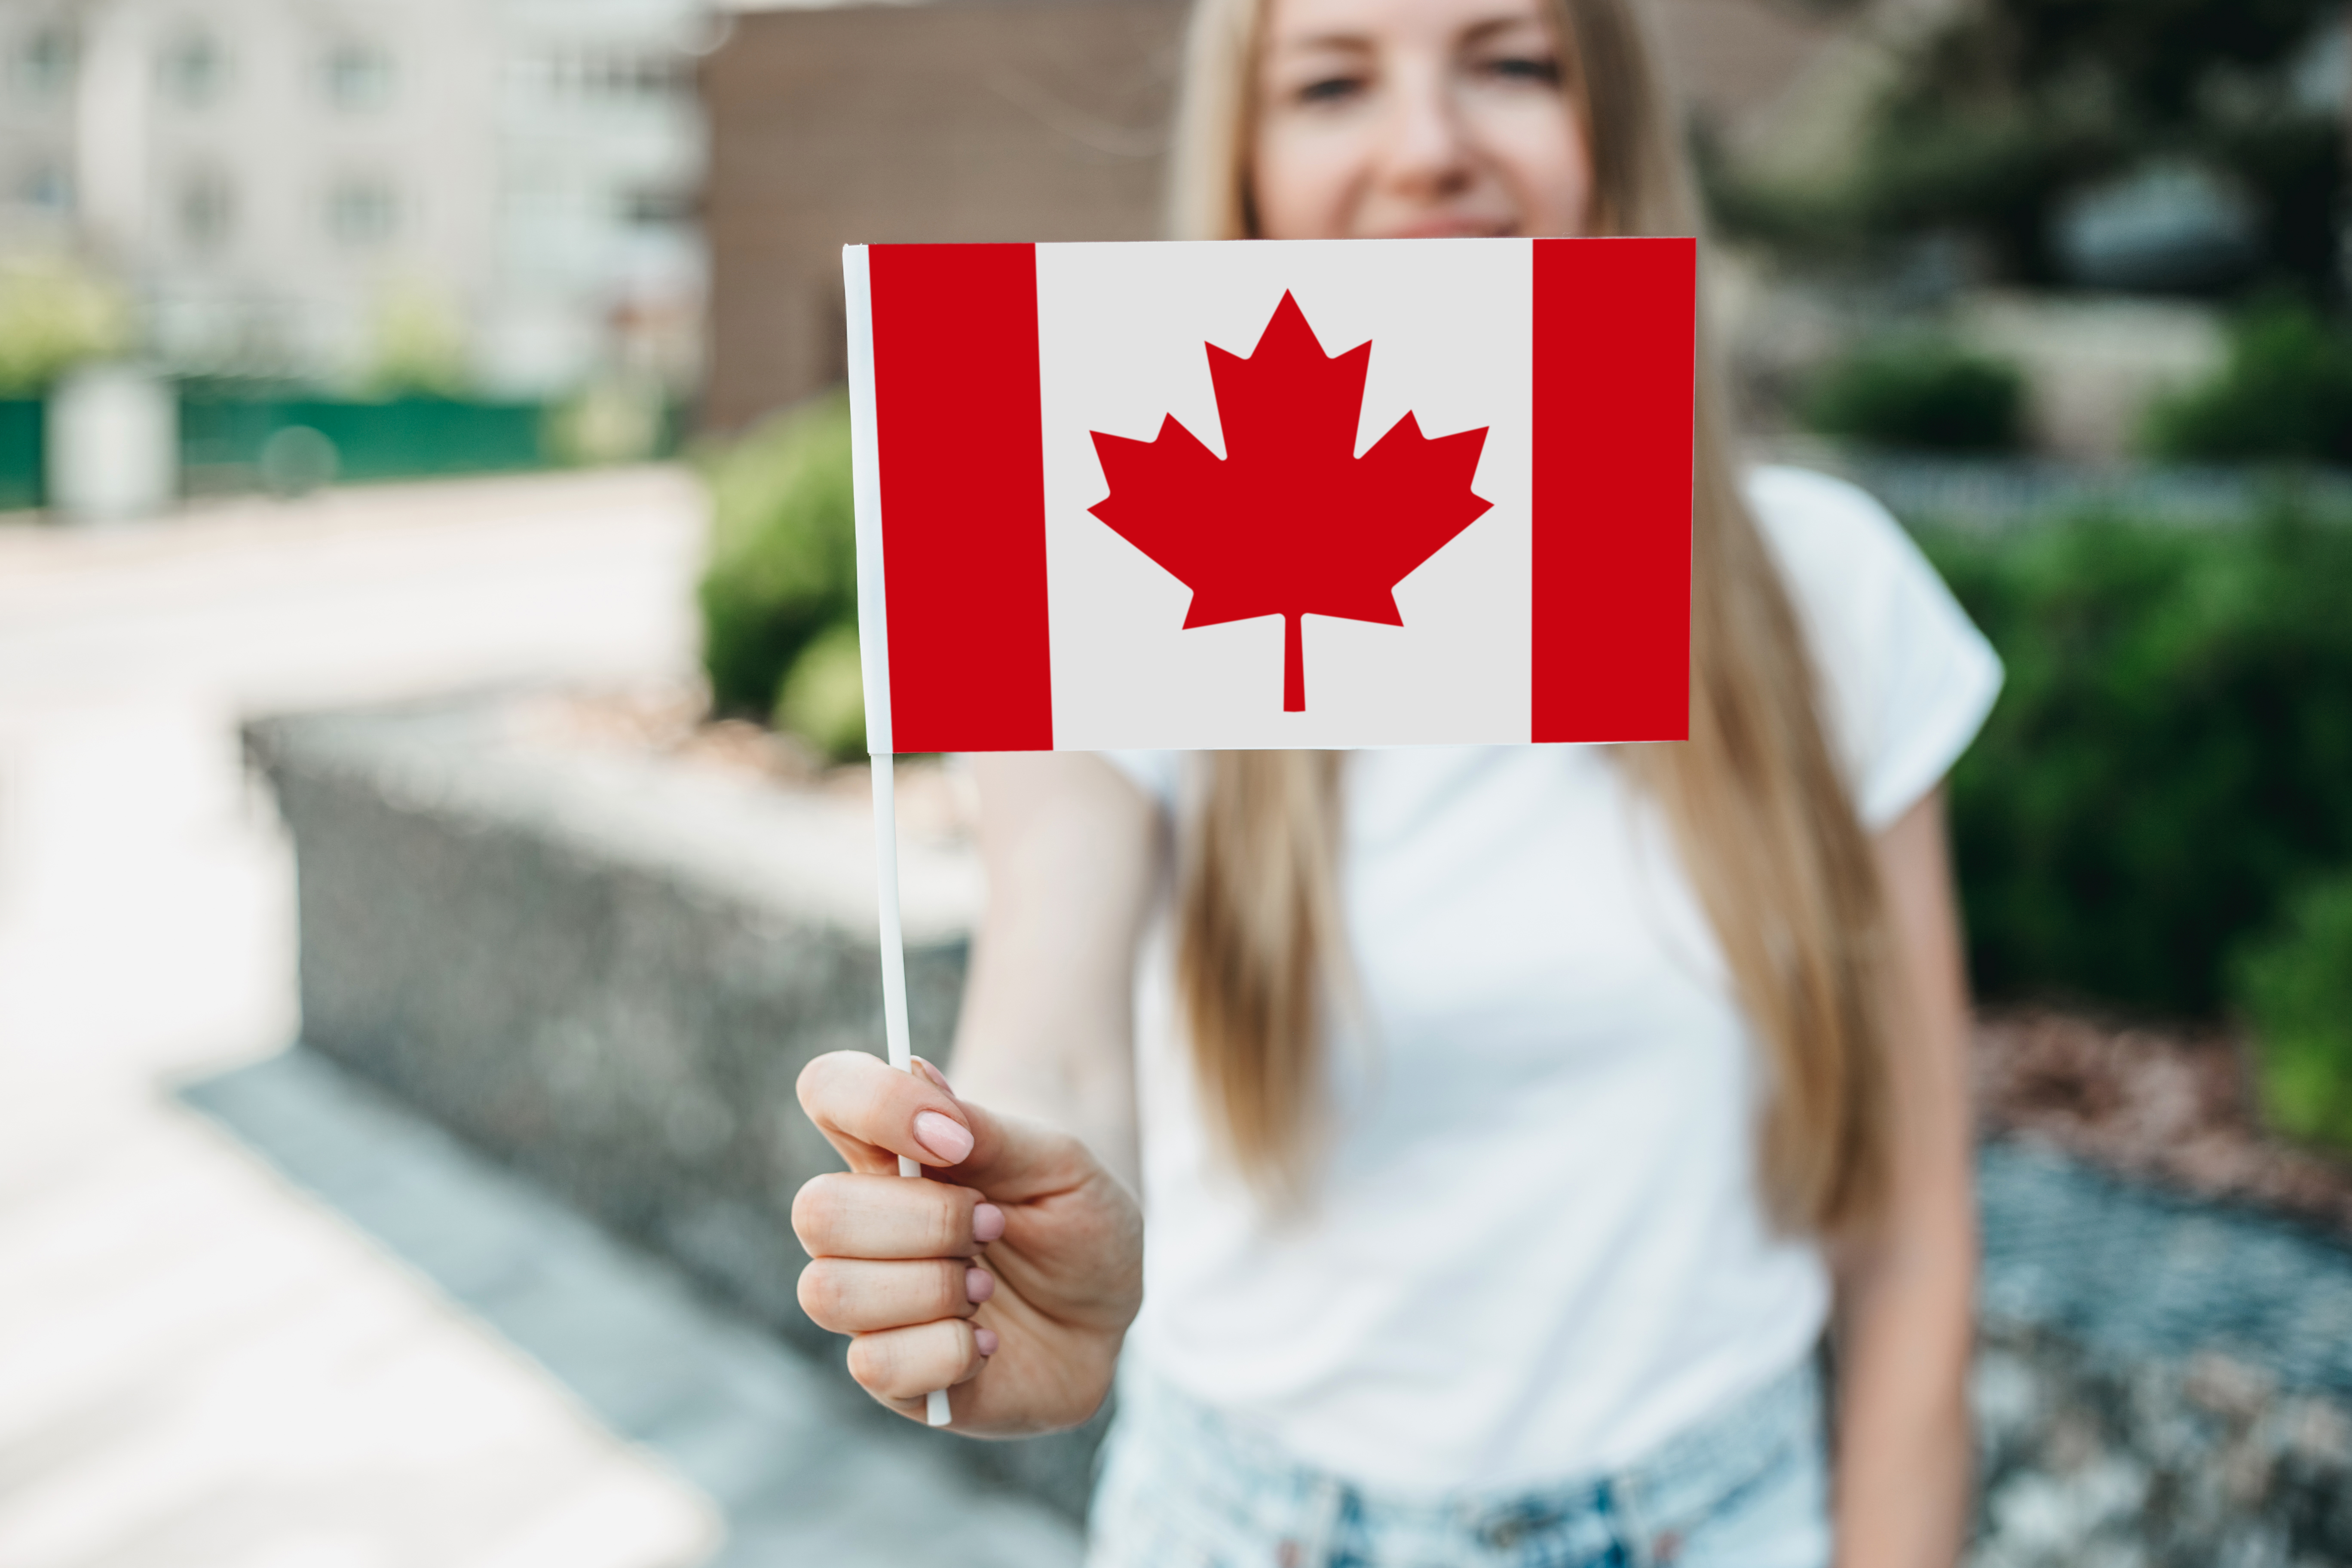 A student with a Canadian flag came to study in Canada